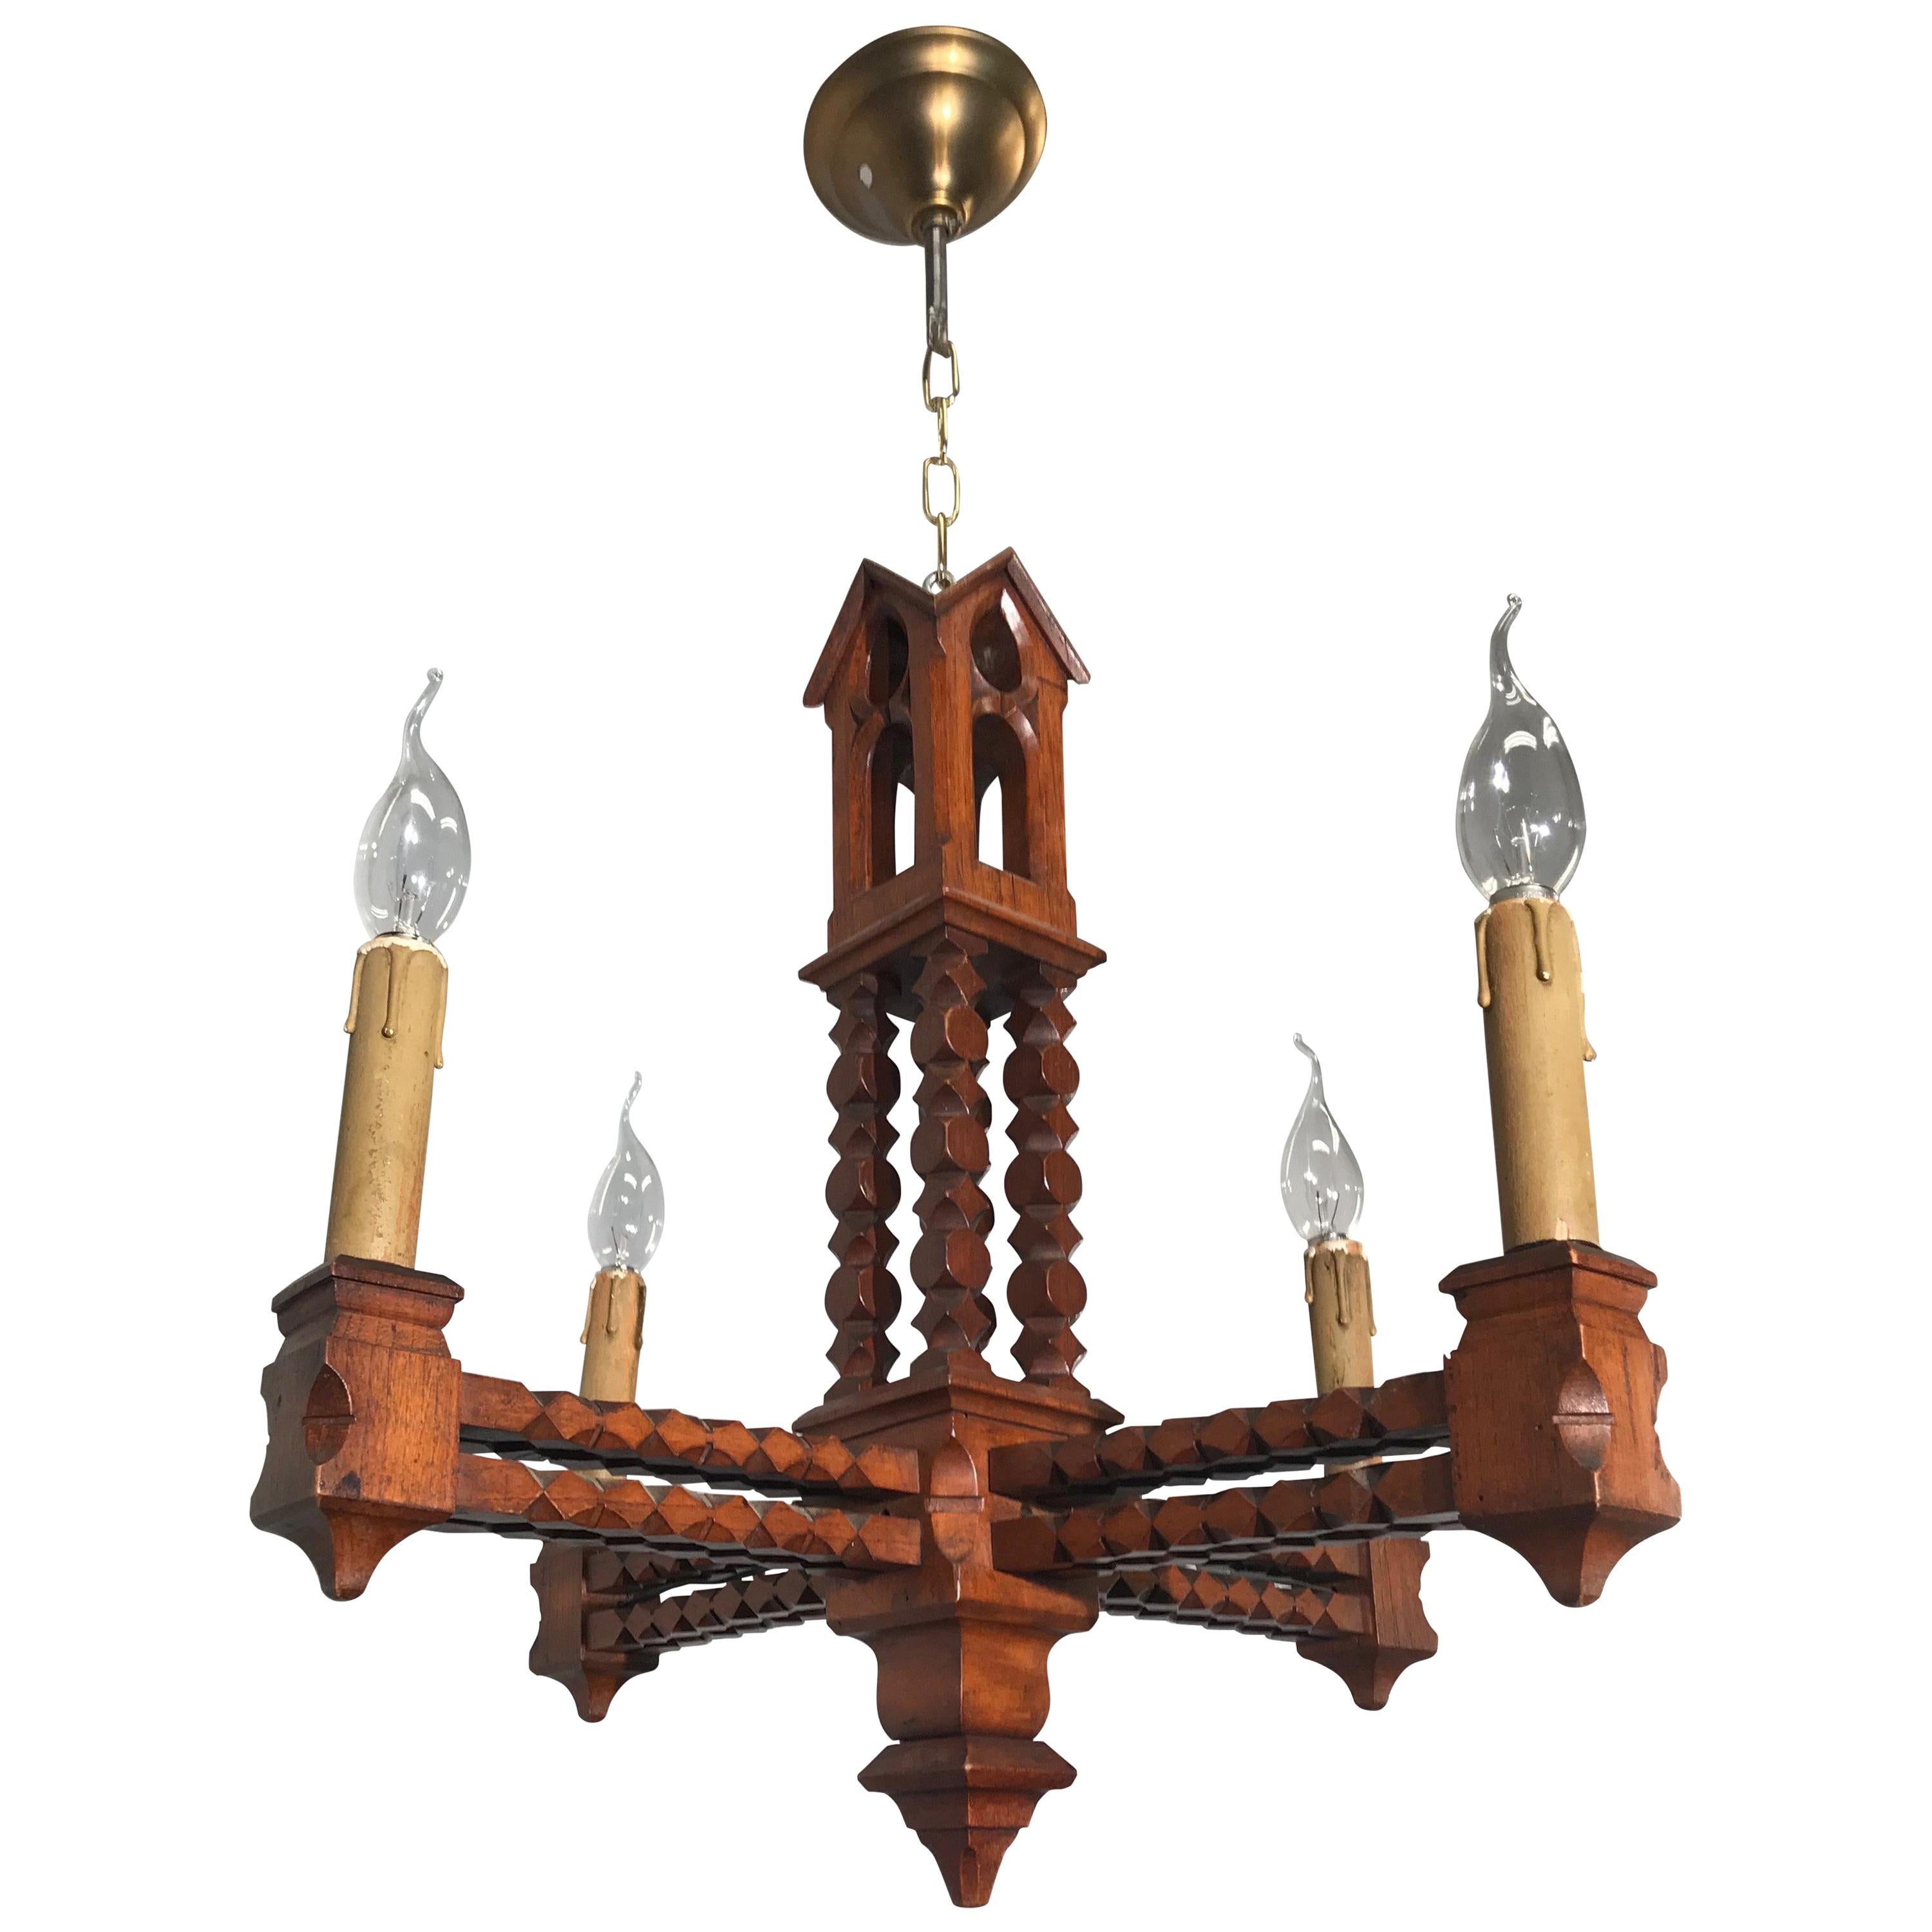 Early 1900 Arts & Crafts Era Gothic Revival Pendant Light, Chandelier or Fixture